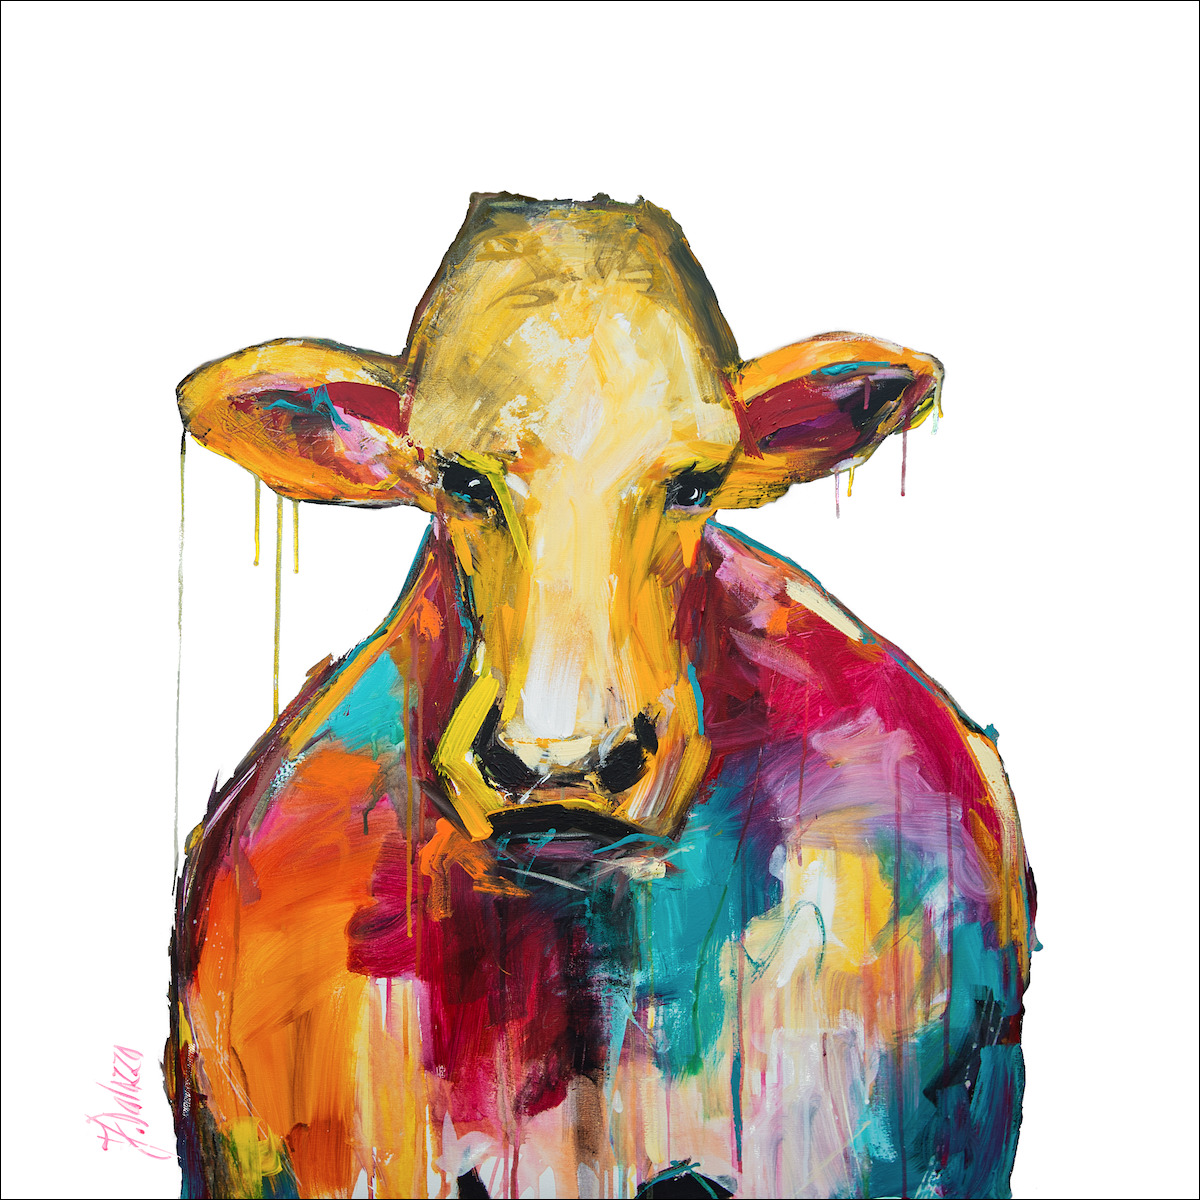 Fluro Animal Animal "Cows with Guns 1" On White Variant From Judith Dalozzo Artwork